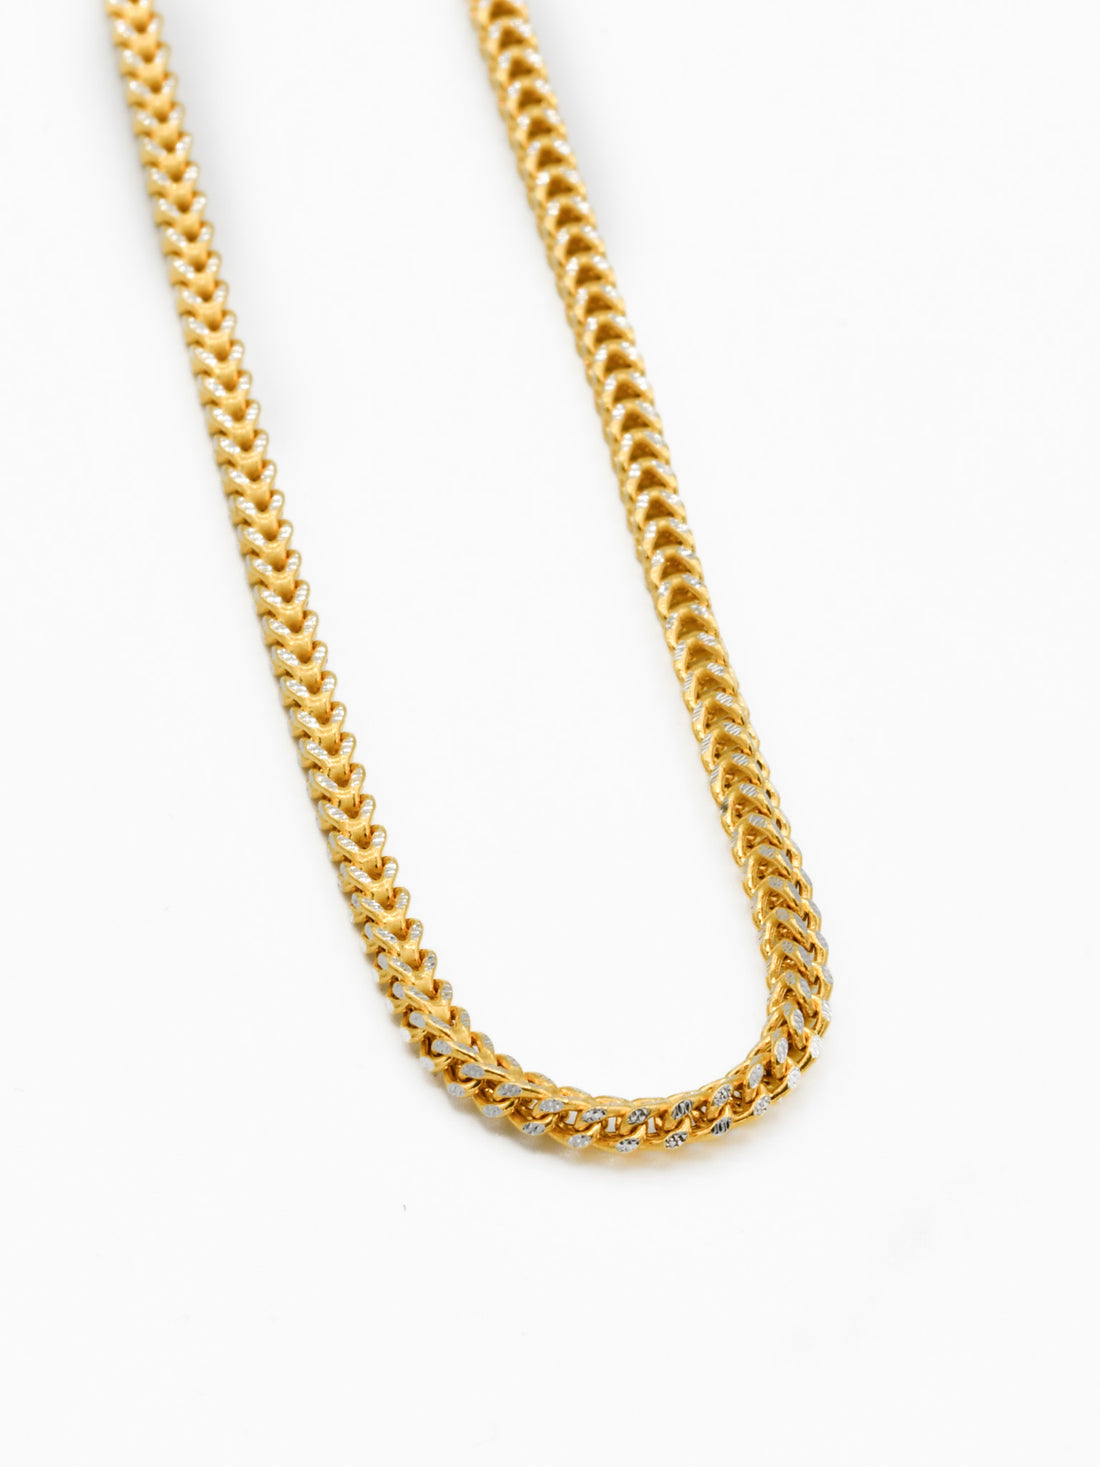 22ct Gold Hollow Two Tone Fox Tail Chain - Roop Darshan